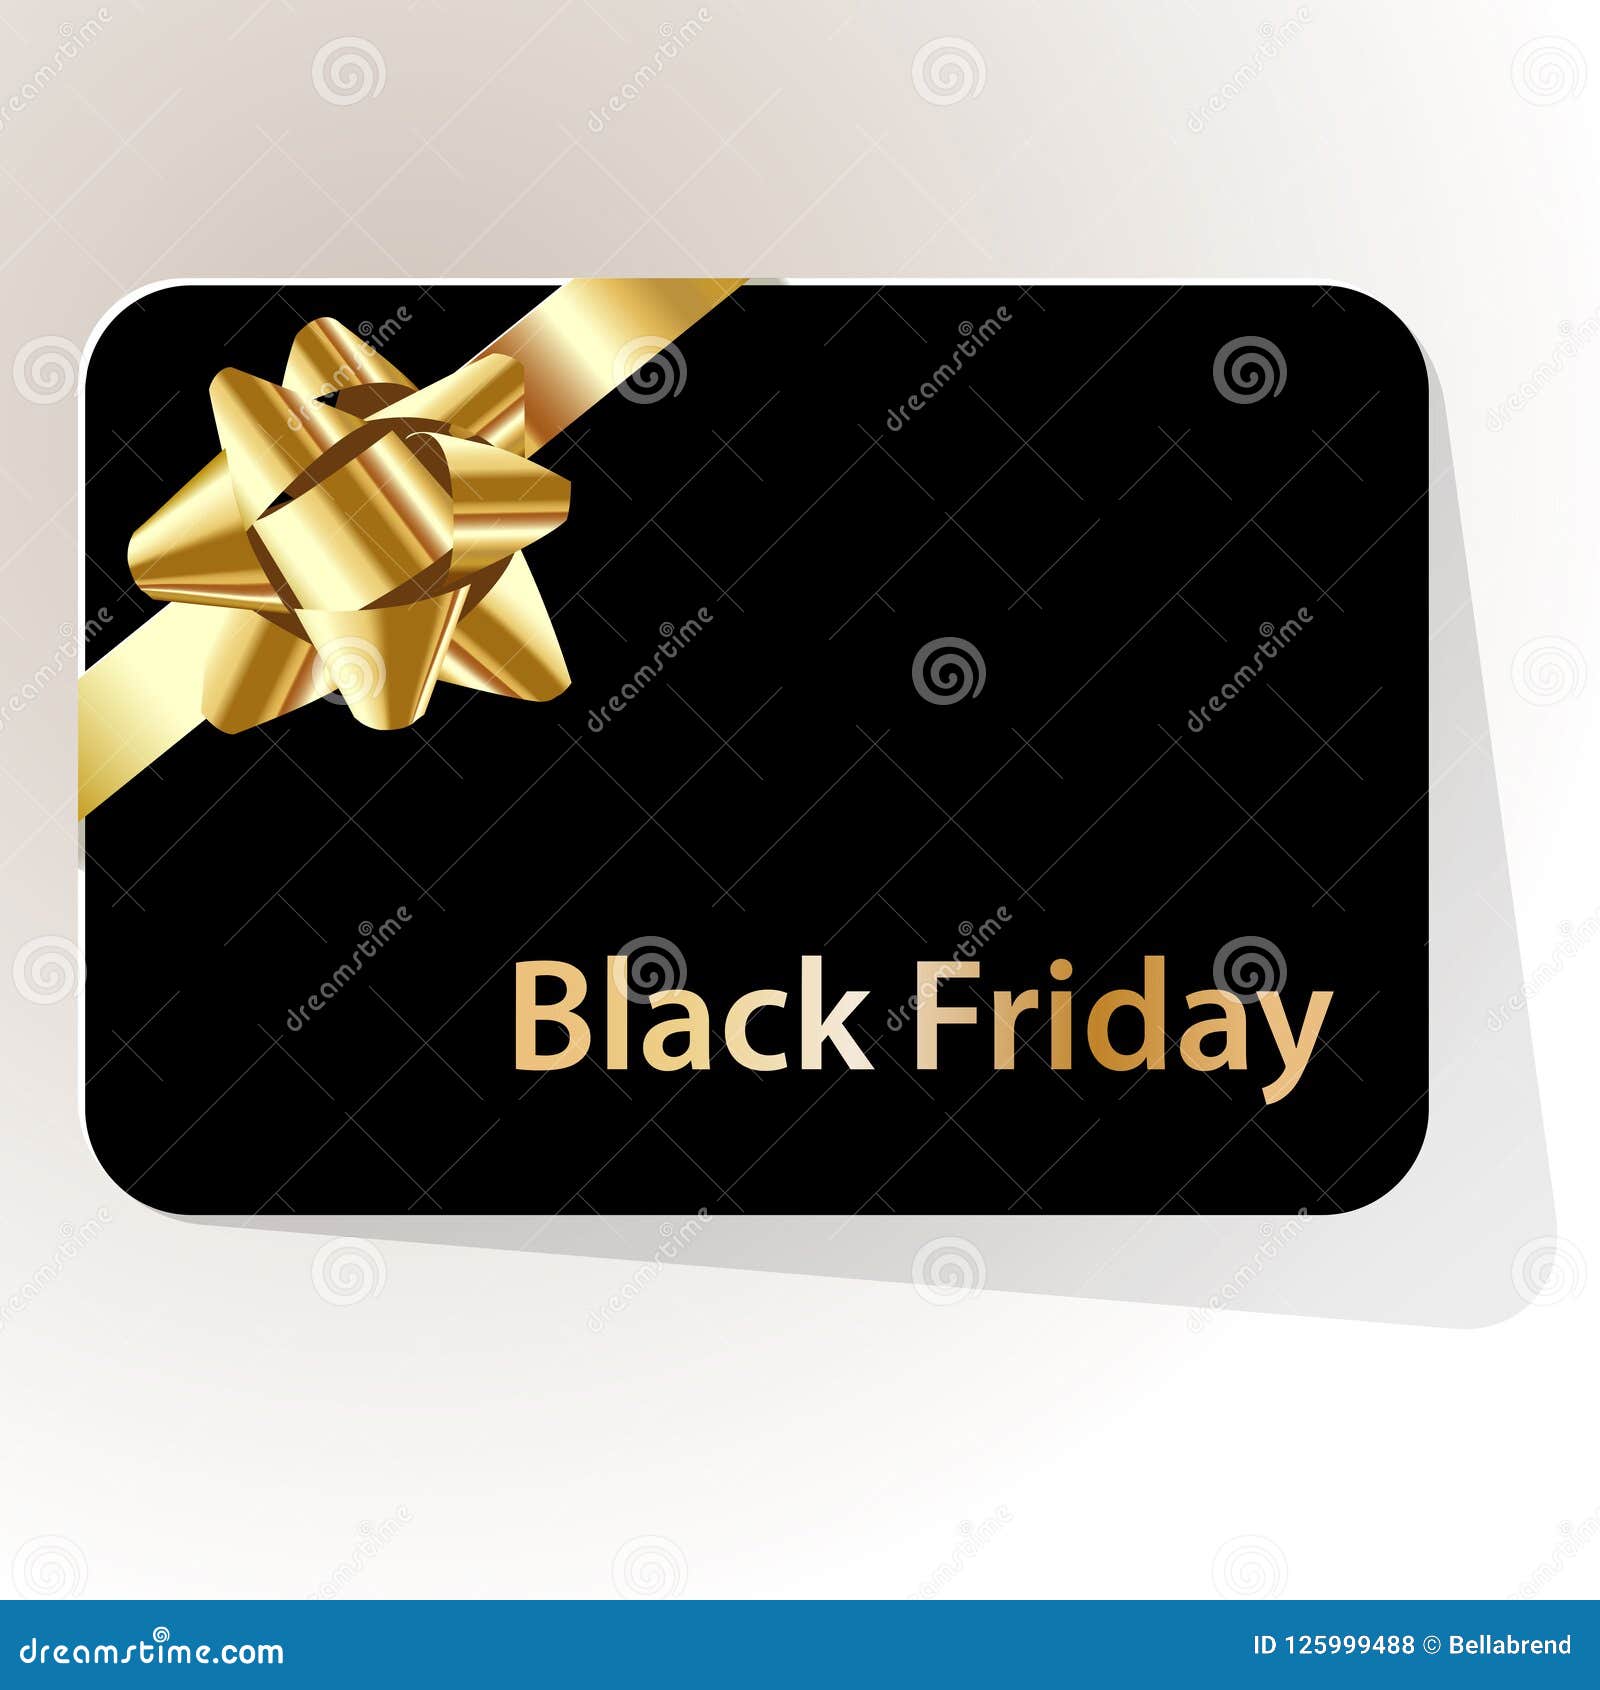 Black friday sale gift card with satin bow Vector Image